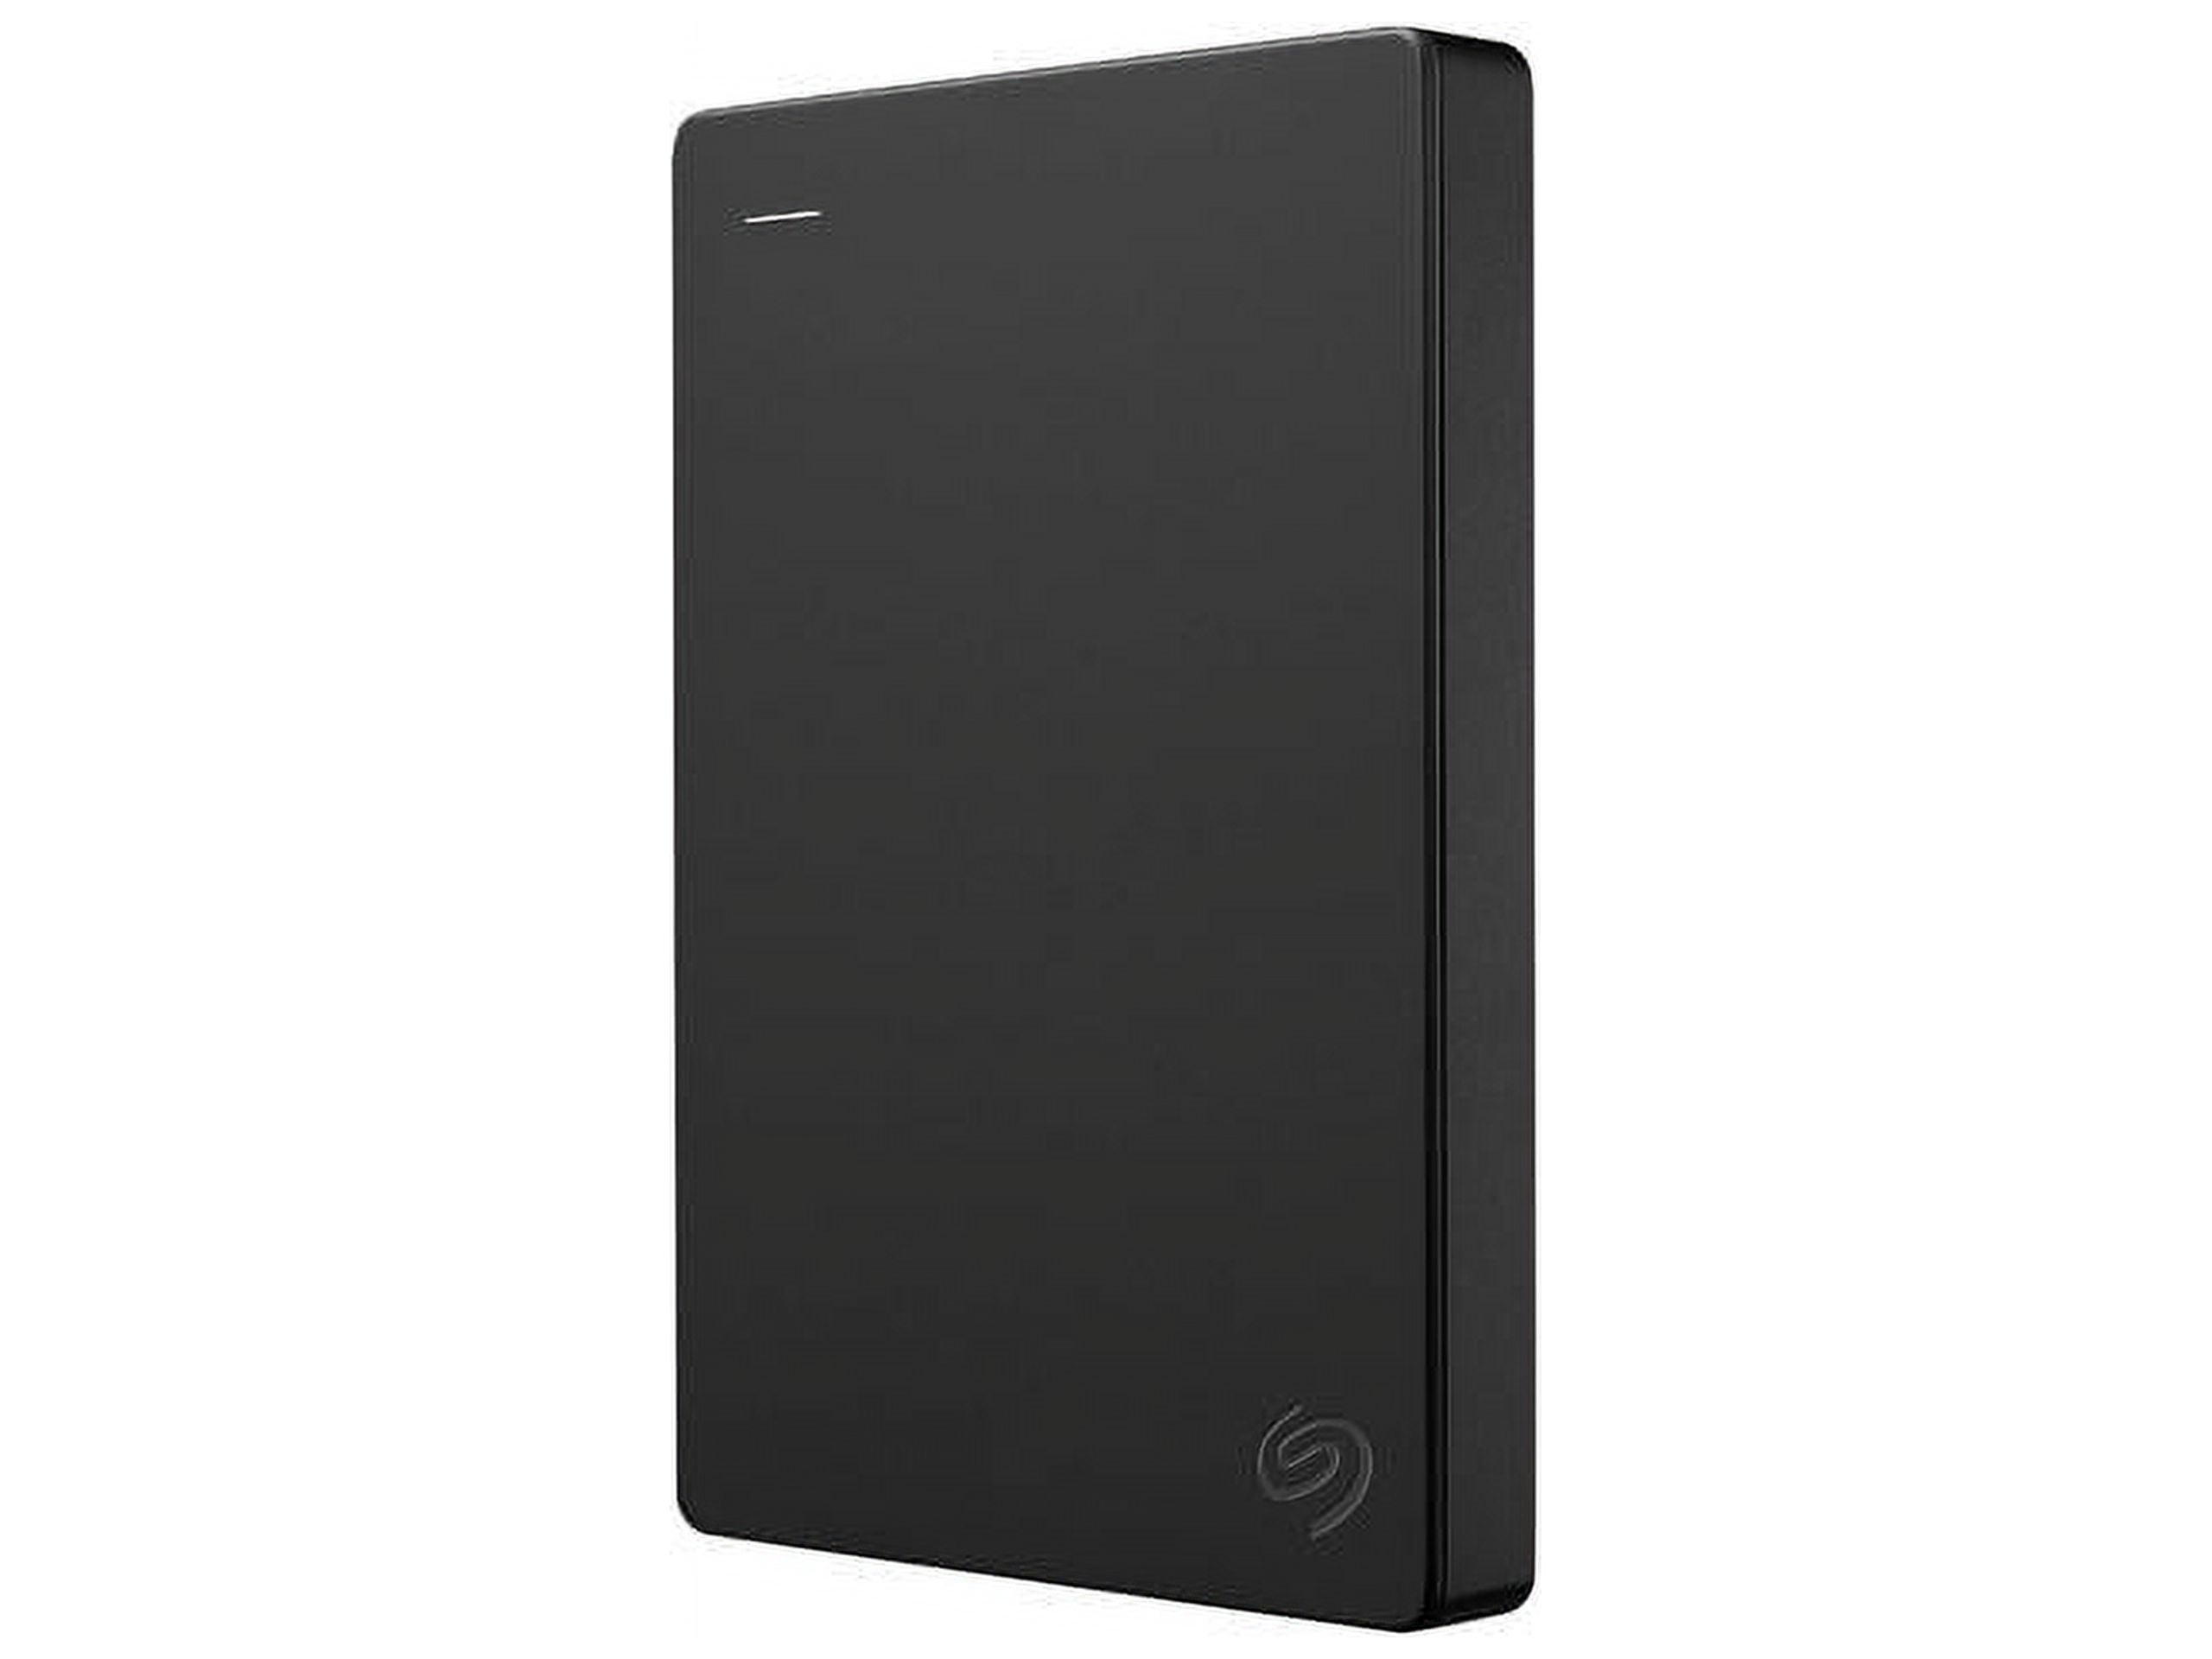 Seagate Portable 4TB External Hard Drive HDD Slim - USB 3.0 for PC Laptop  and Mac (STGX4000400) 